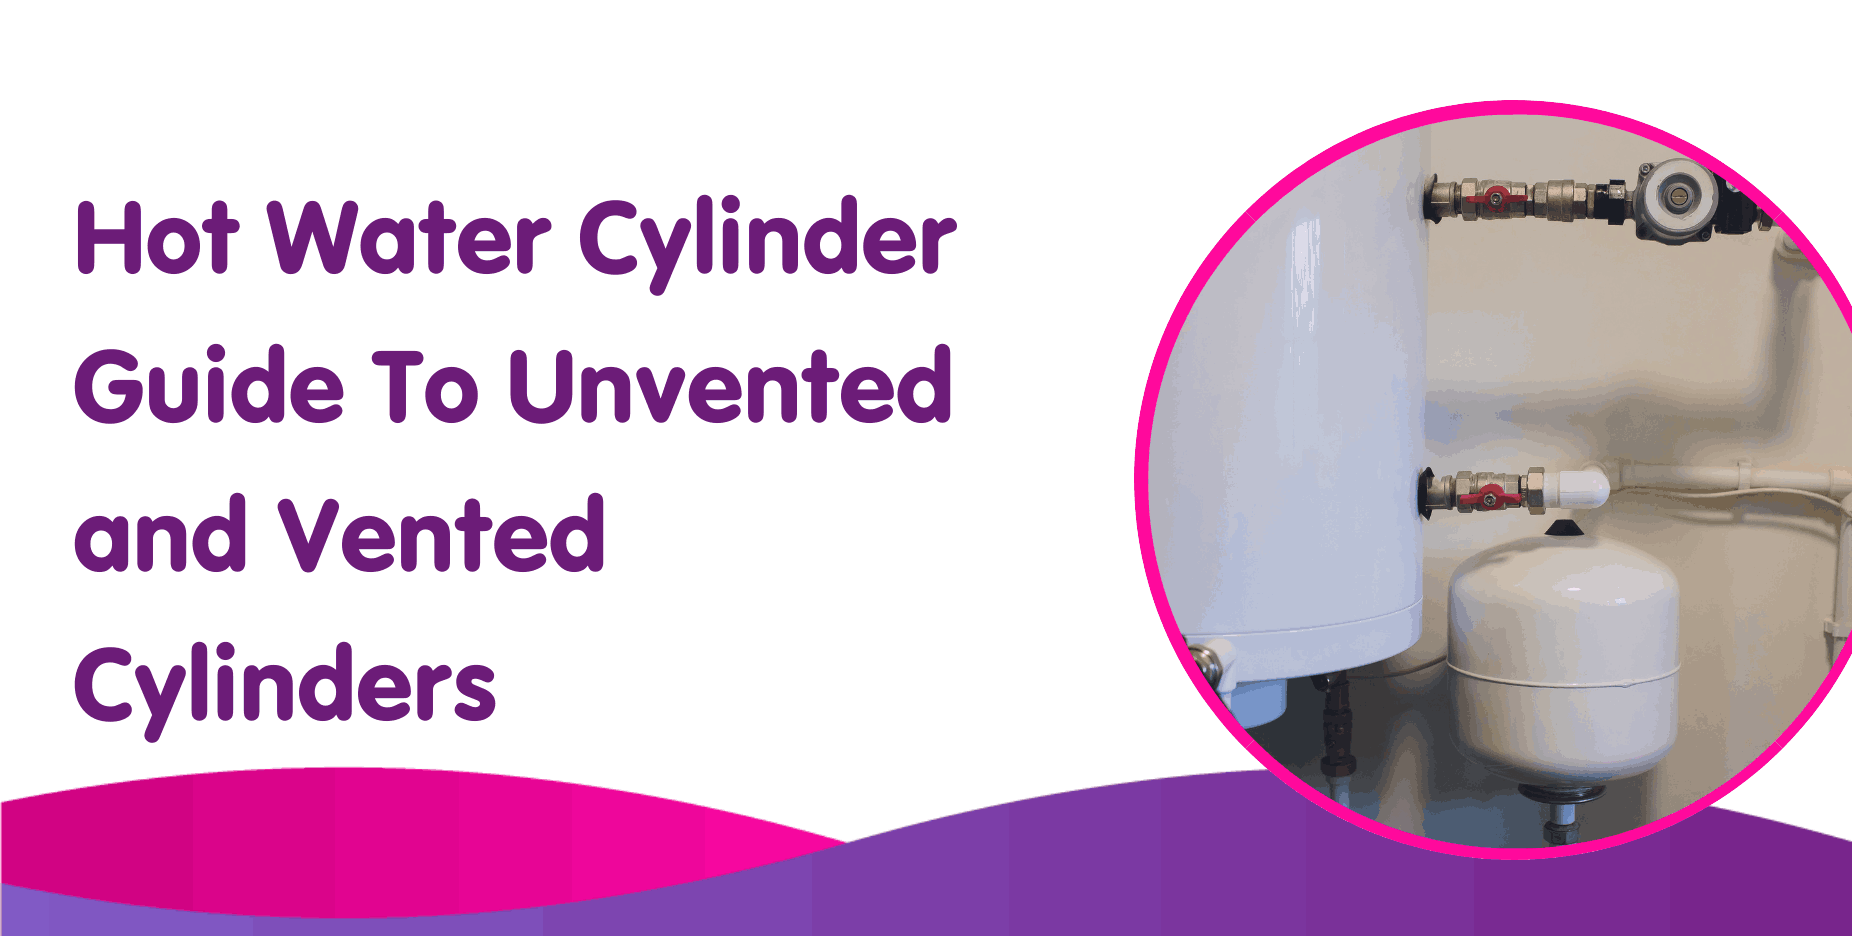 Hot Water Cylinder Guide To Unvented and Vented Cylinders